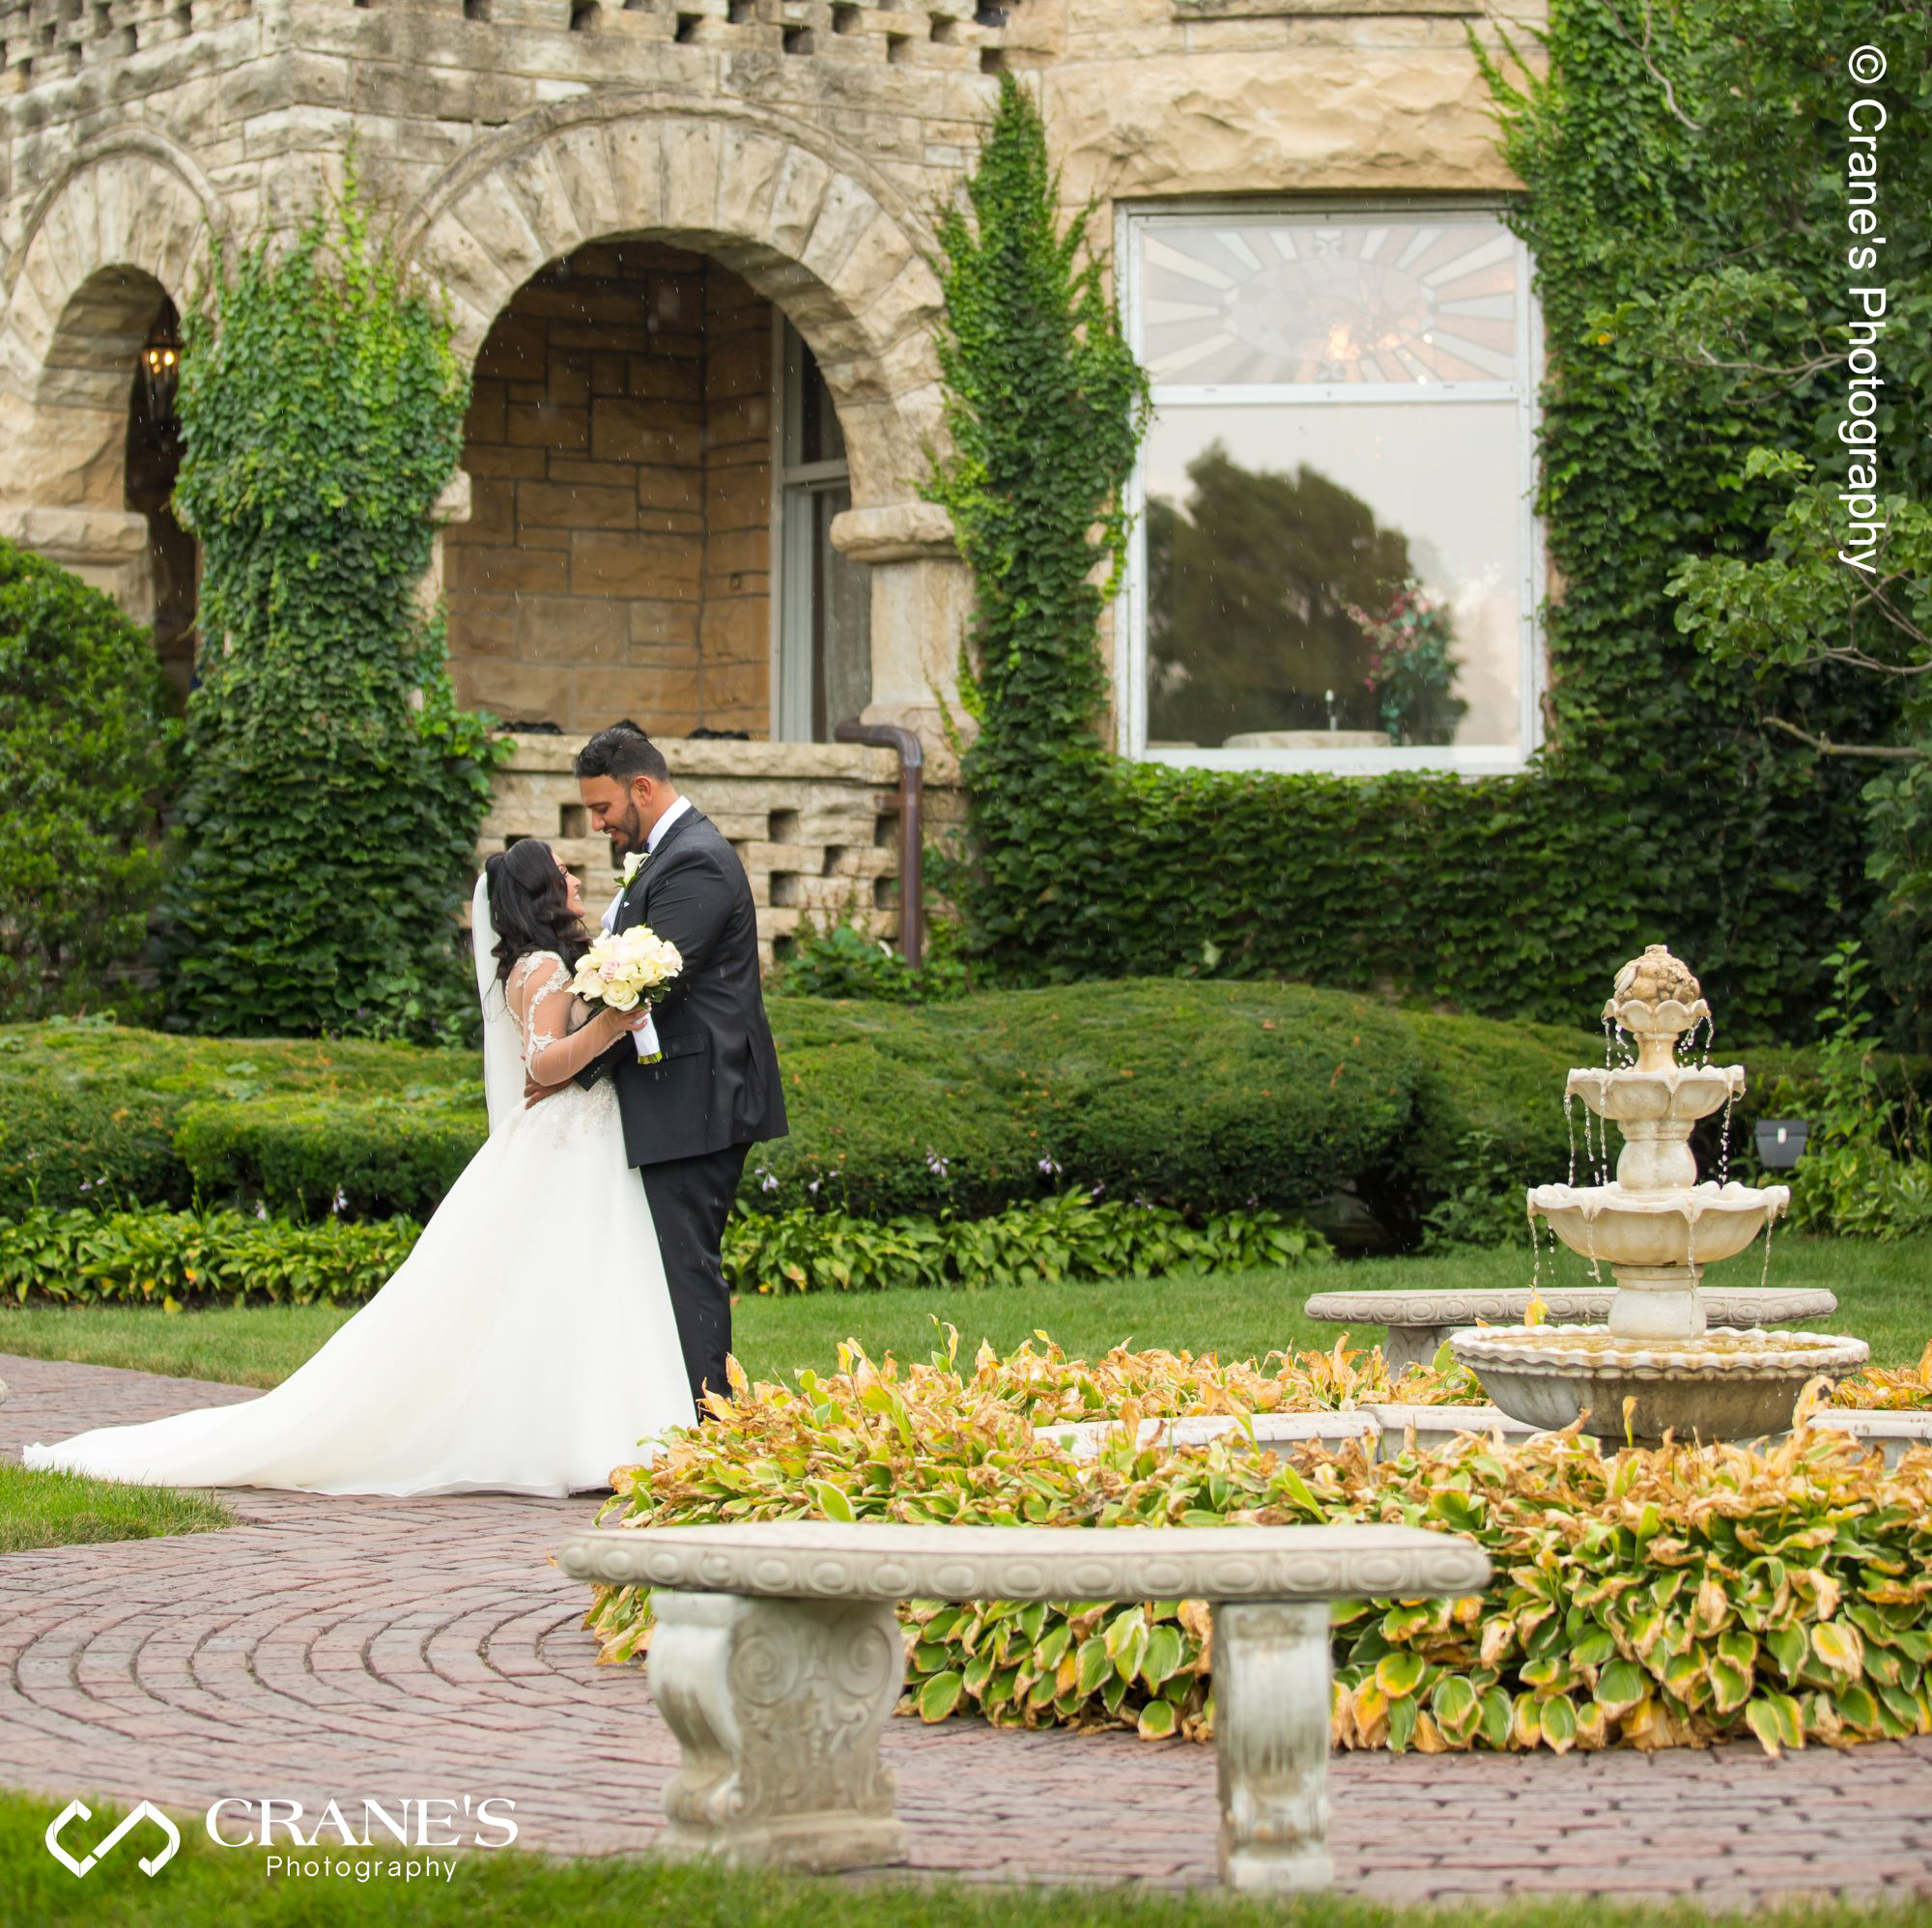 Haley Mansion wedding image taken during the summer next to the fountain on the front yard